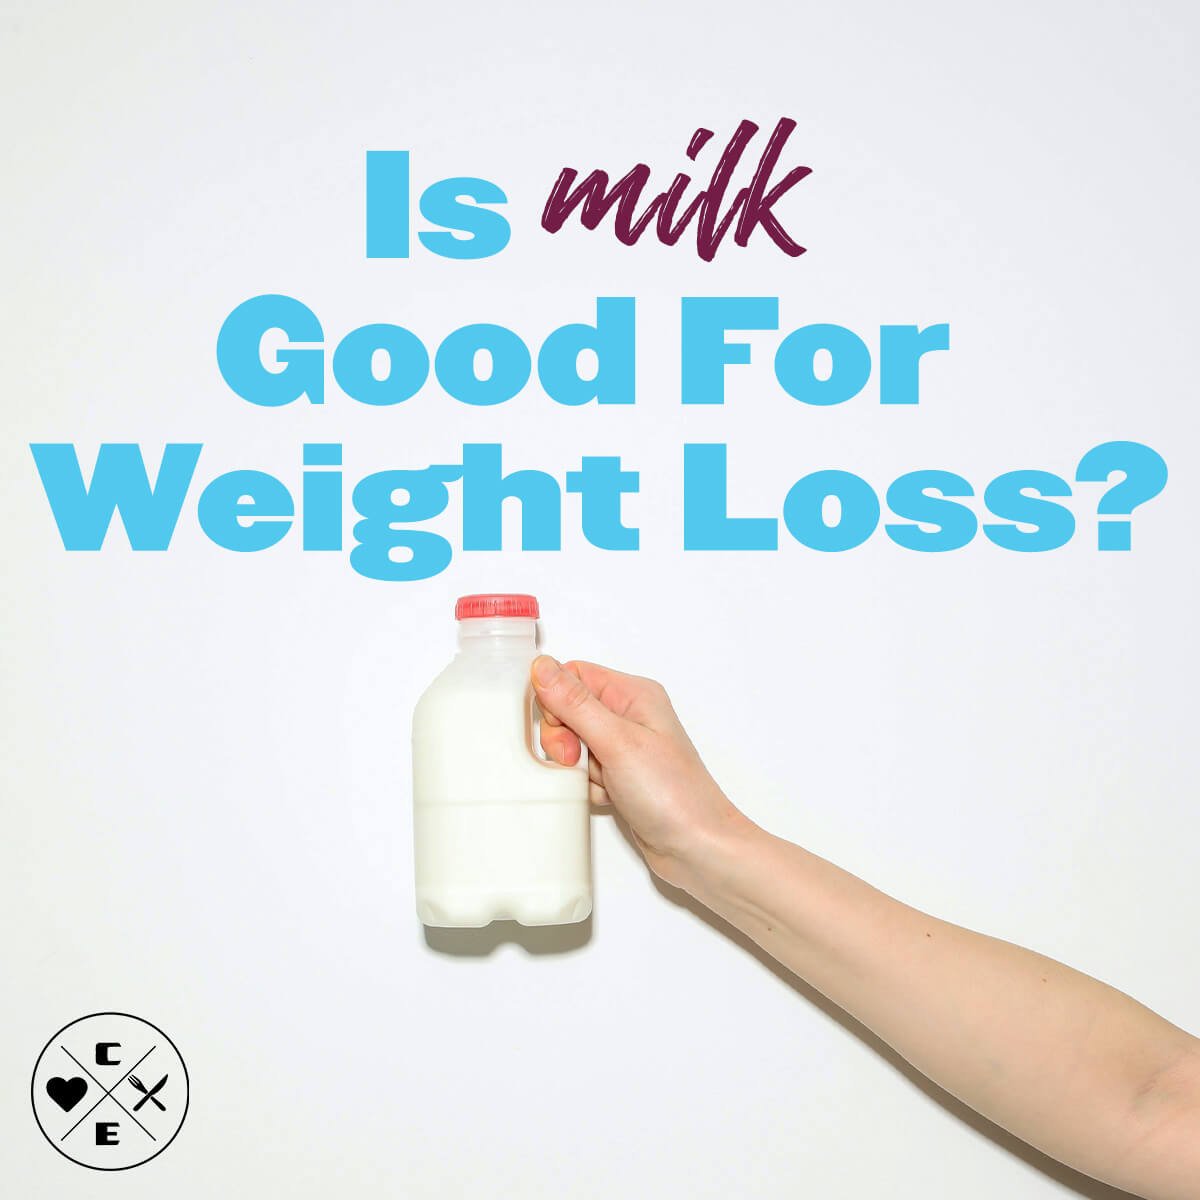 Know how to make skimmed milk for your weight loss journey